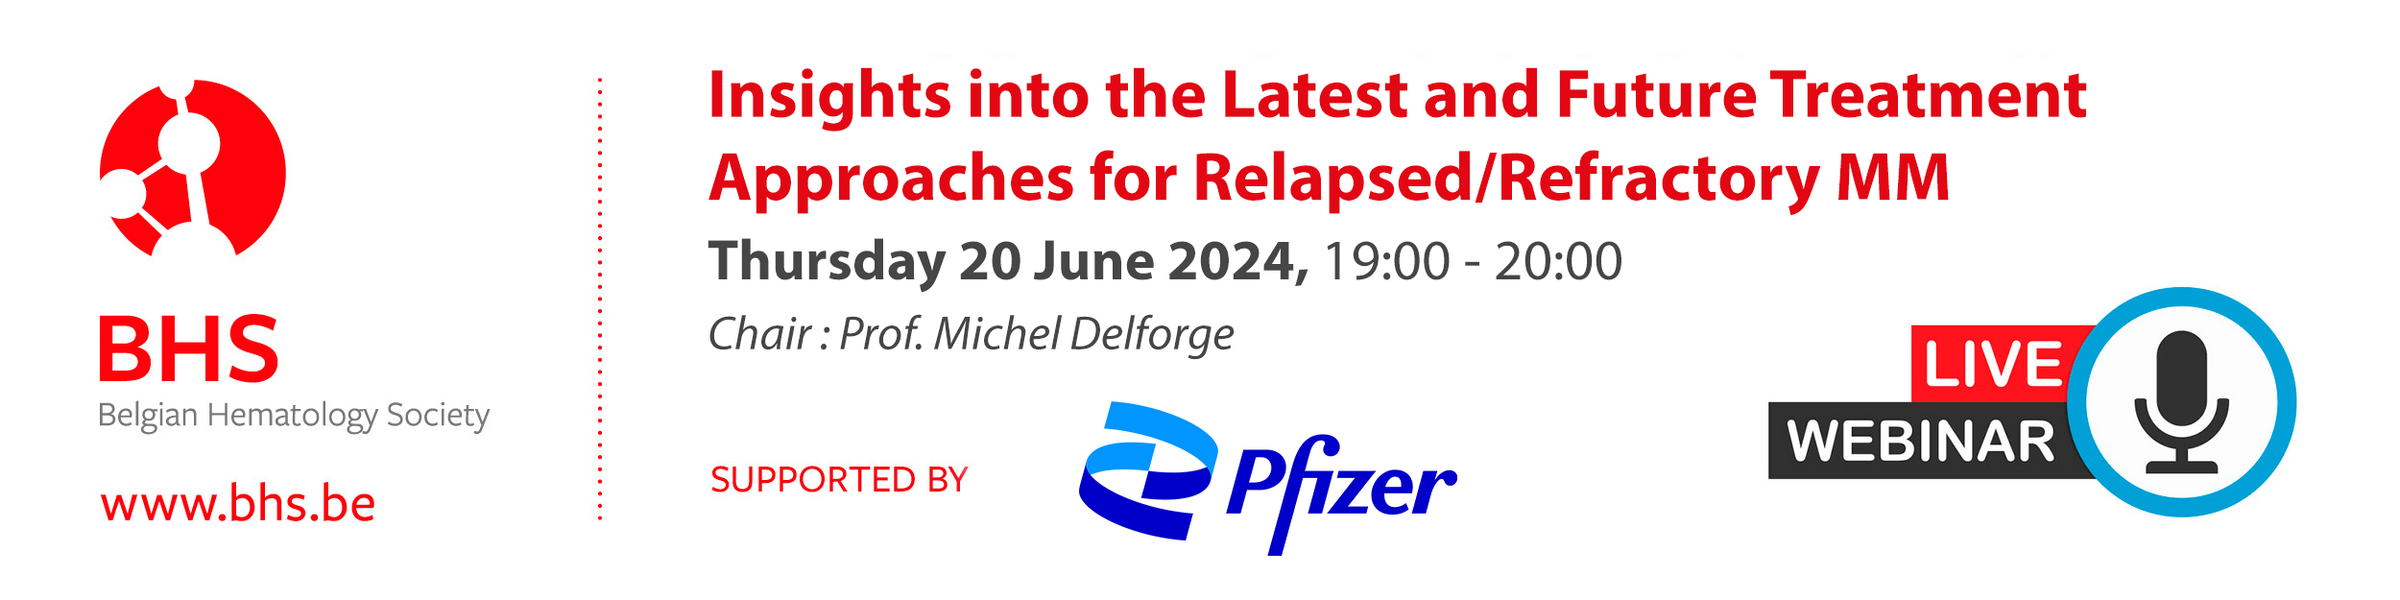 BHS Webinar supported by Pfizer_20 june 2024